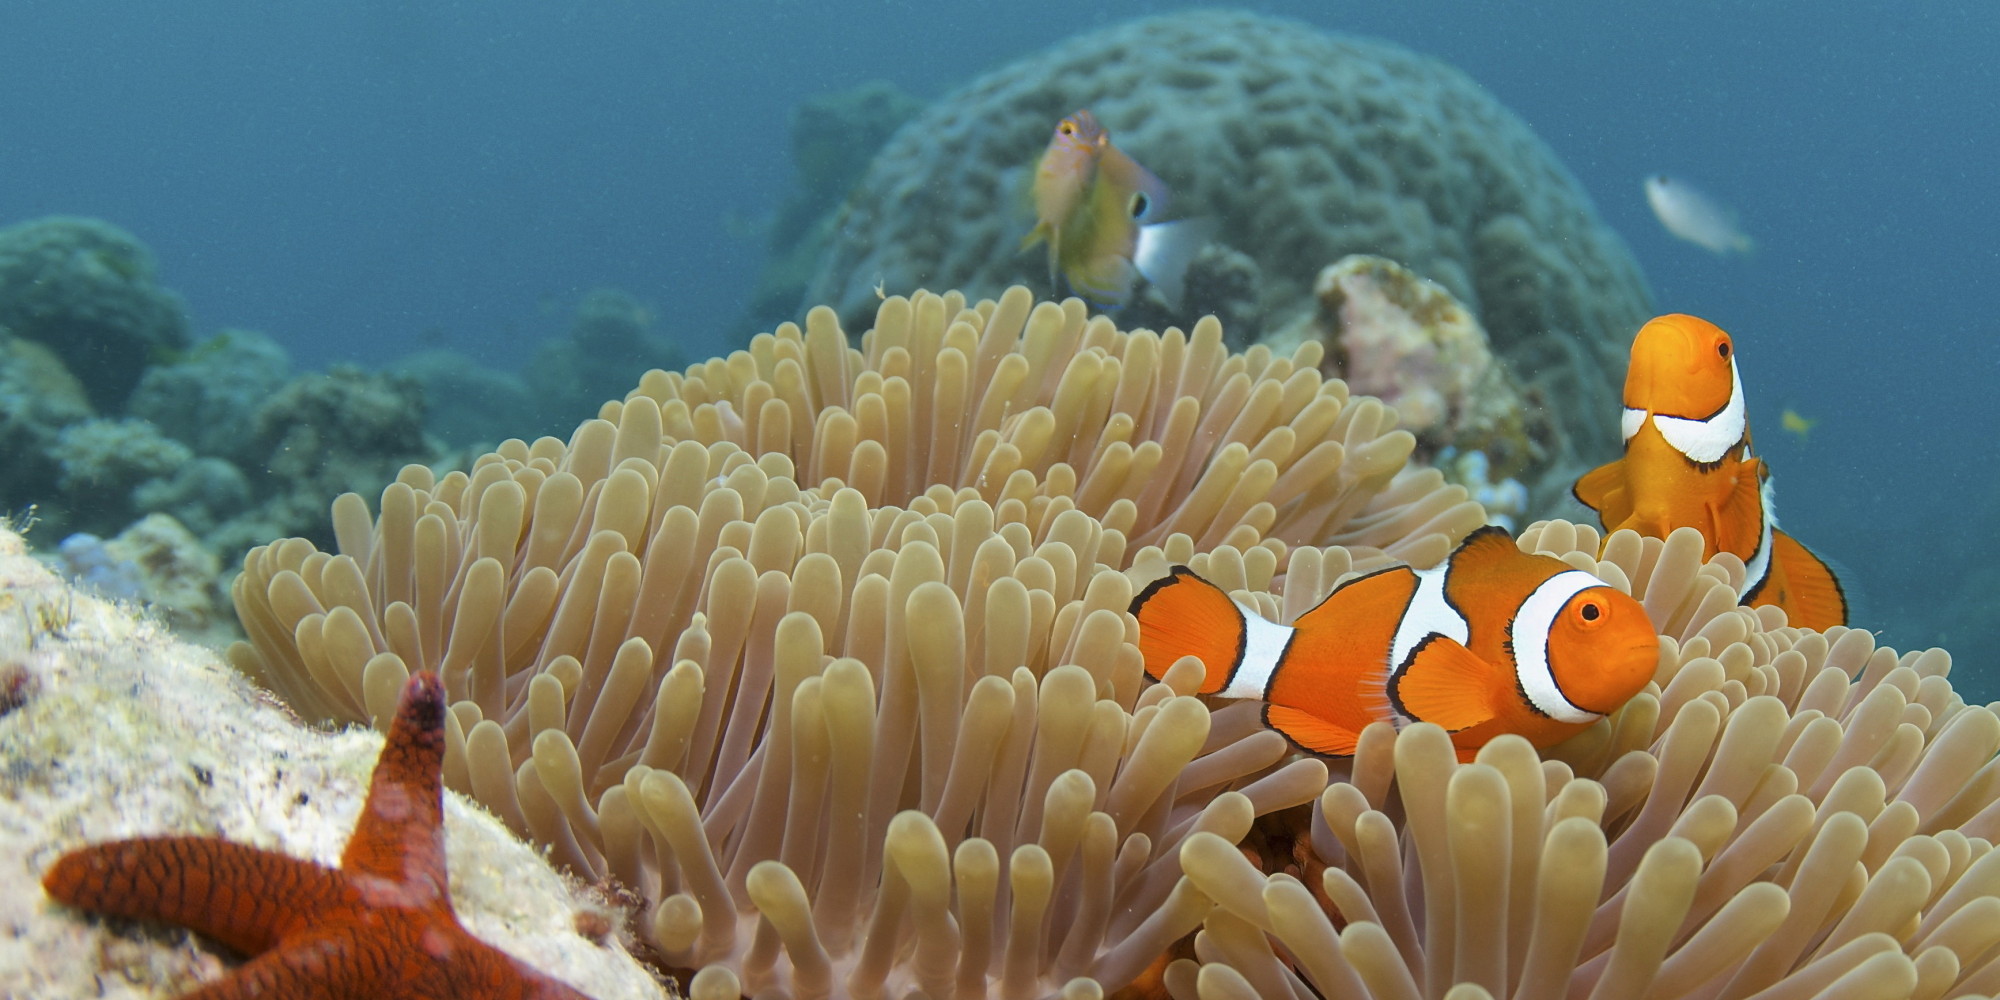 10 Interesting Facts About The Great Barrier Reef - Printable Templates ...